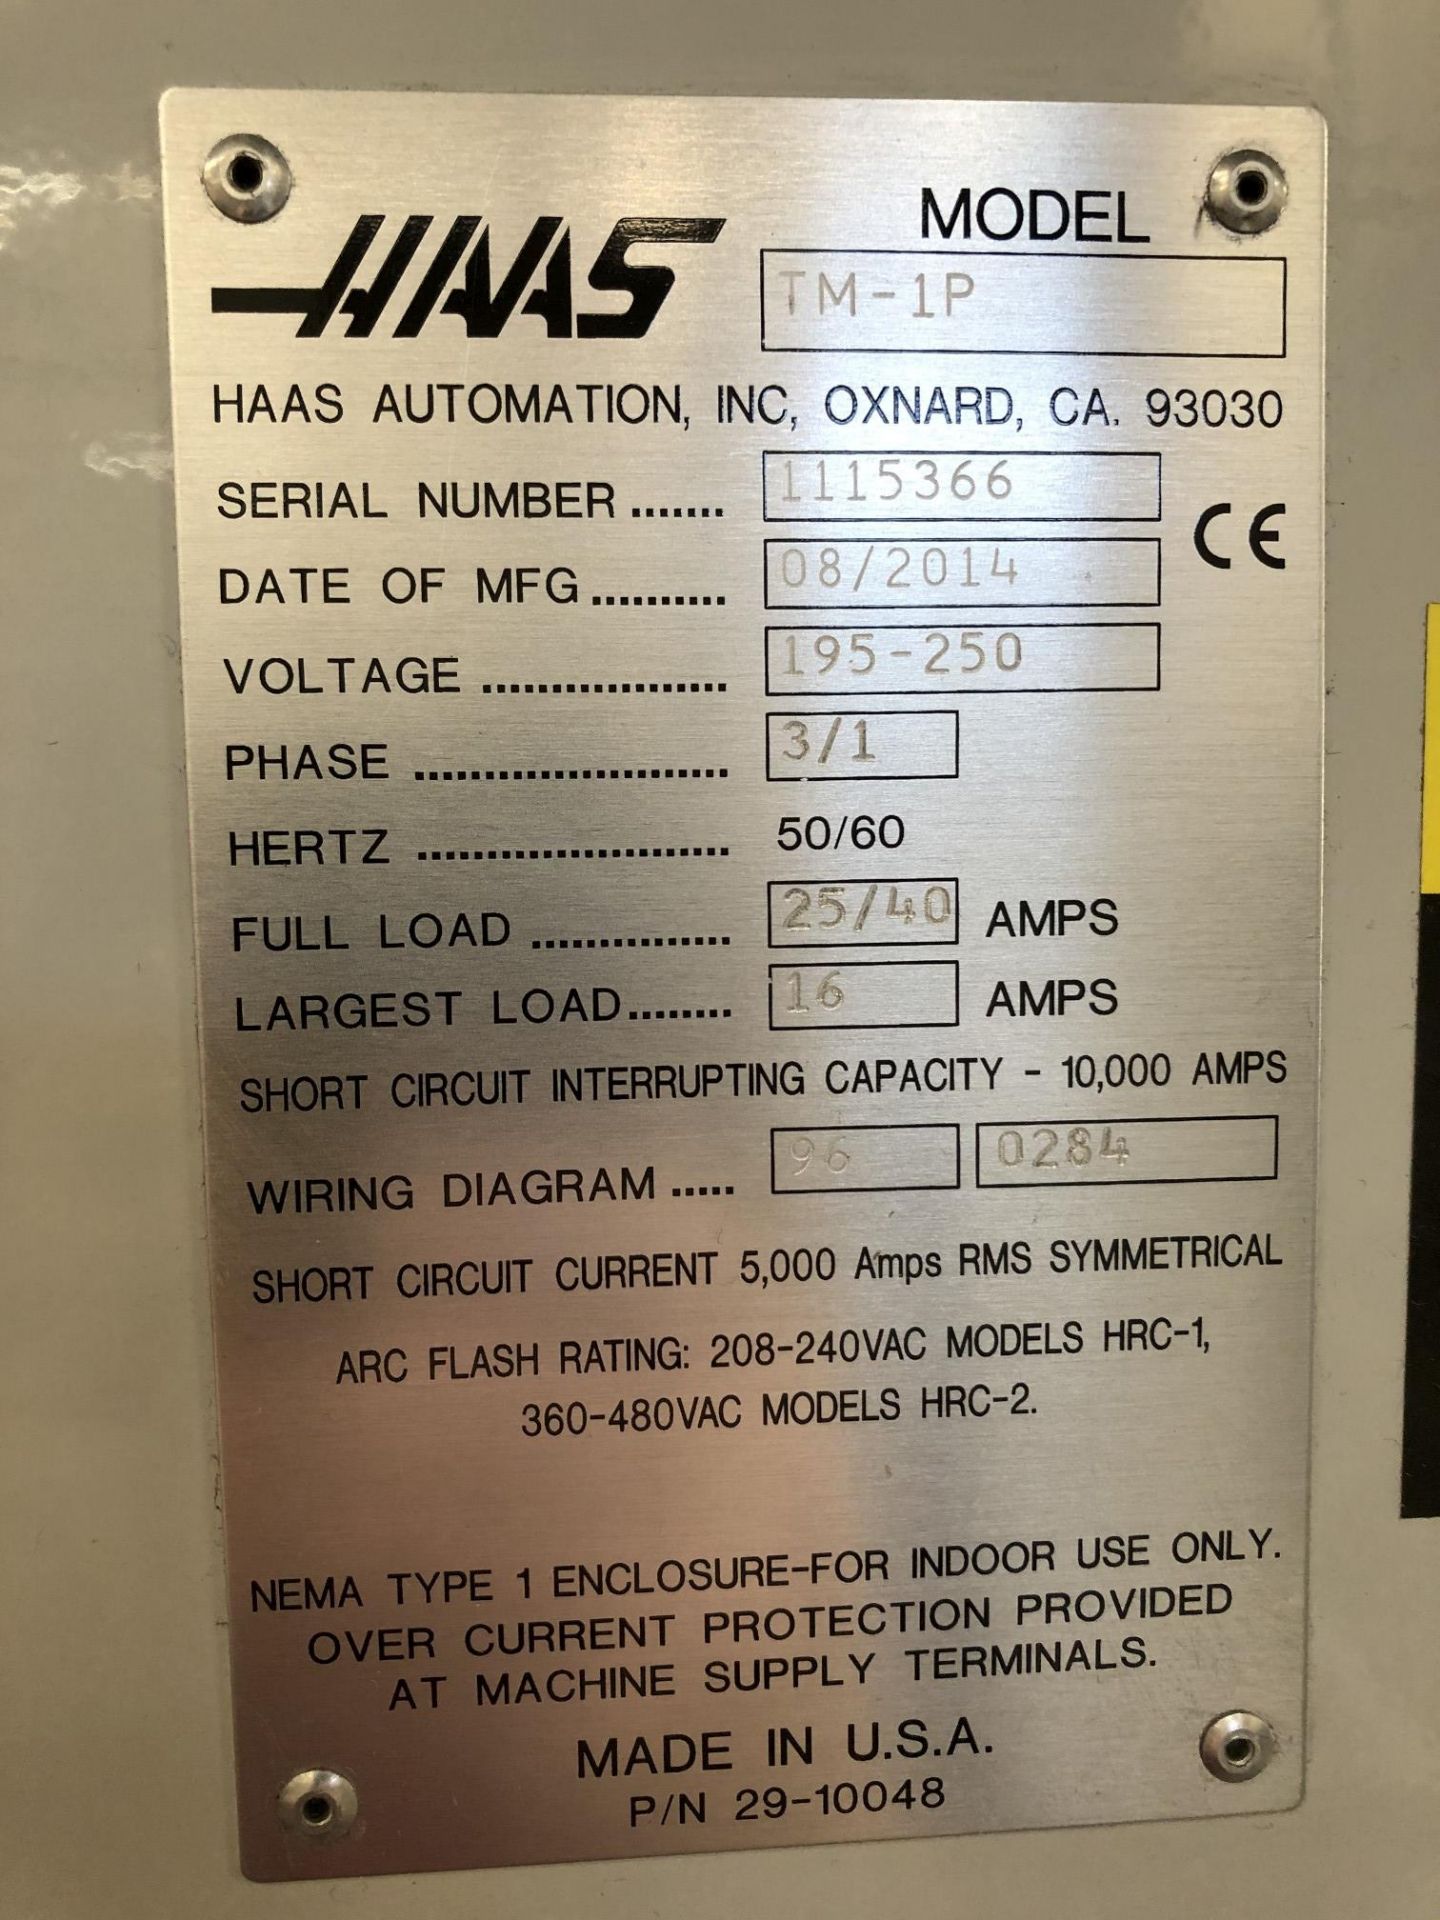 2014 Haas TM-1P Vertical Machining Center, X=30", Y=12", Z=16", 6000 Max RPM, 10 ATC, 10-1/2" x 41- - Image 10 of 11